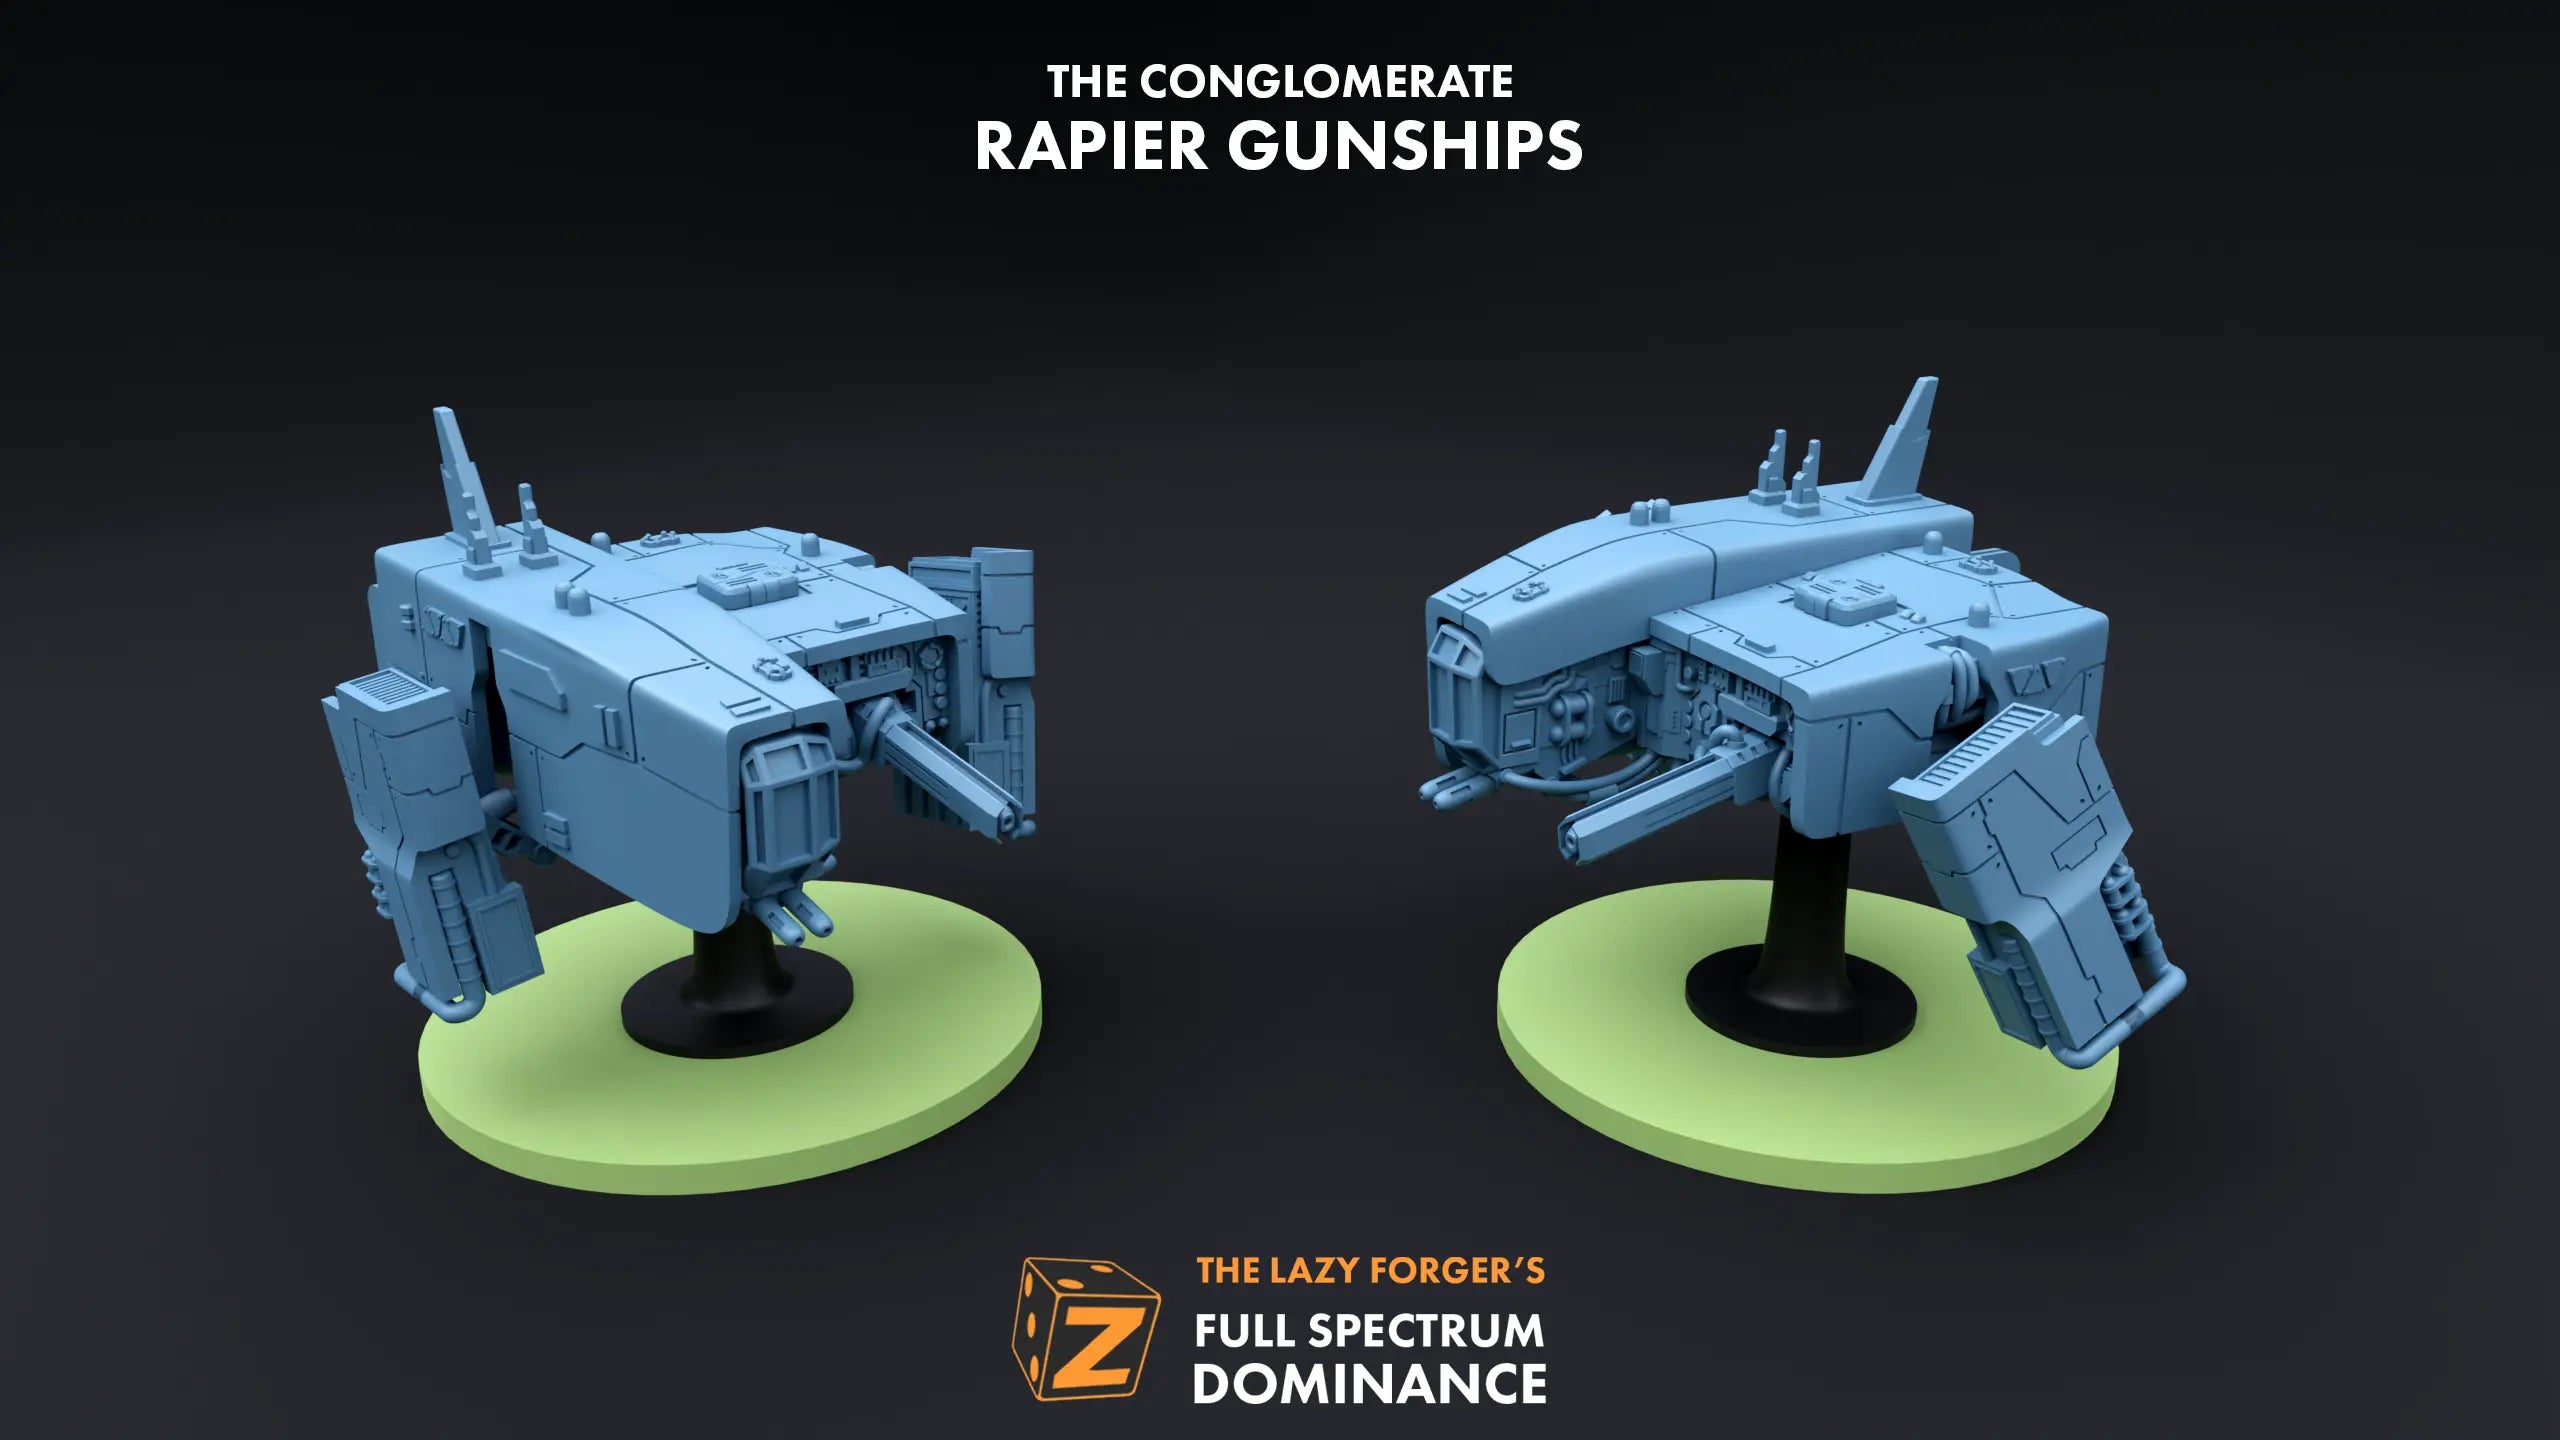 Rapier Gunships (2) - The Conglomerate The Lazy Forger